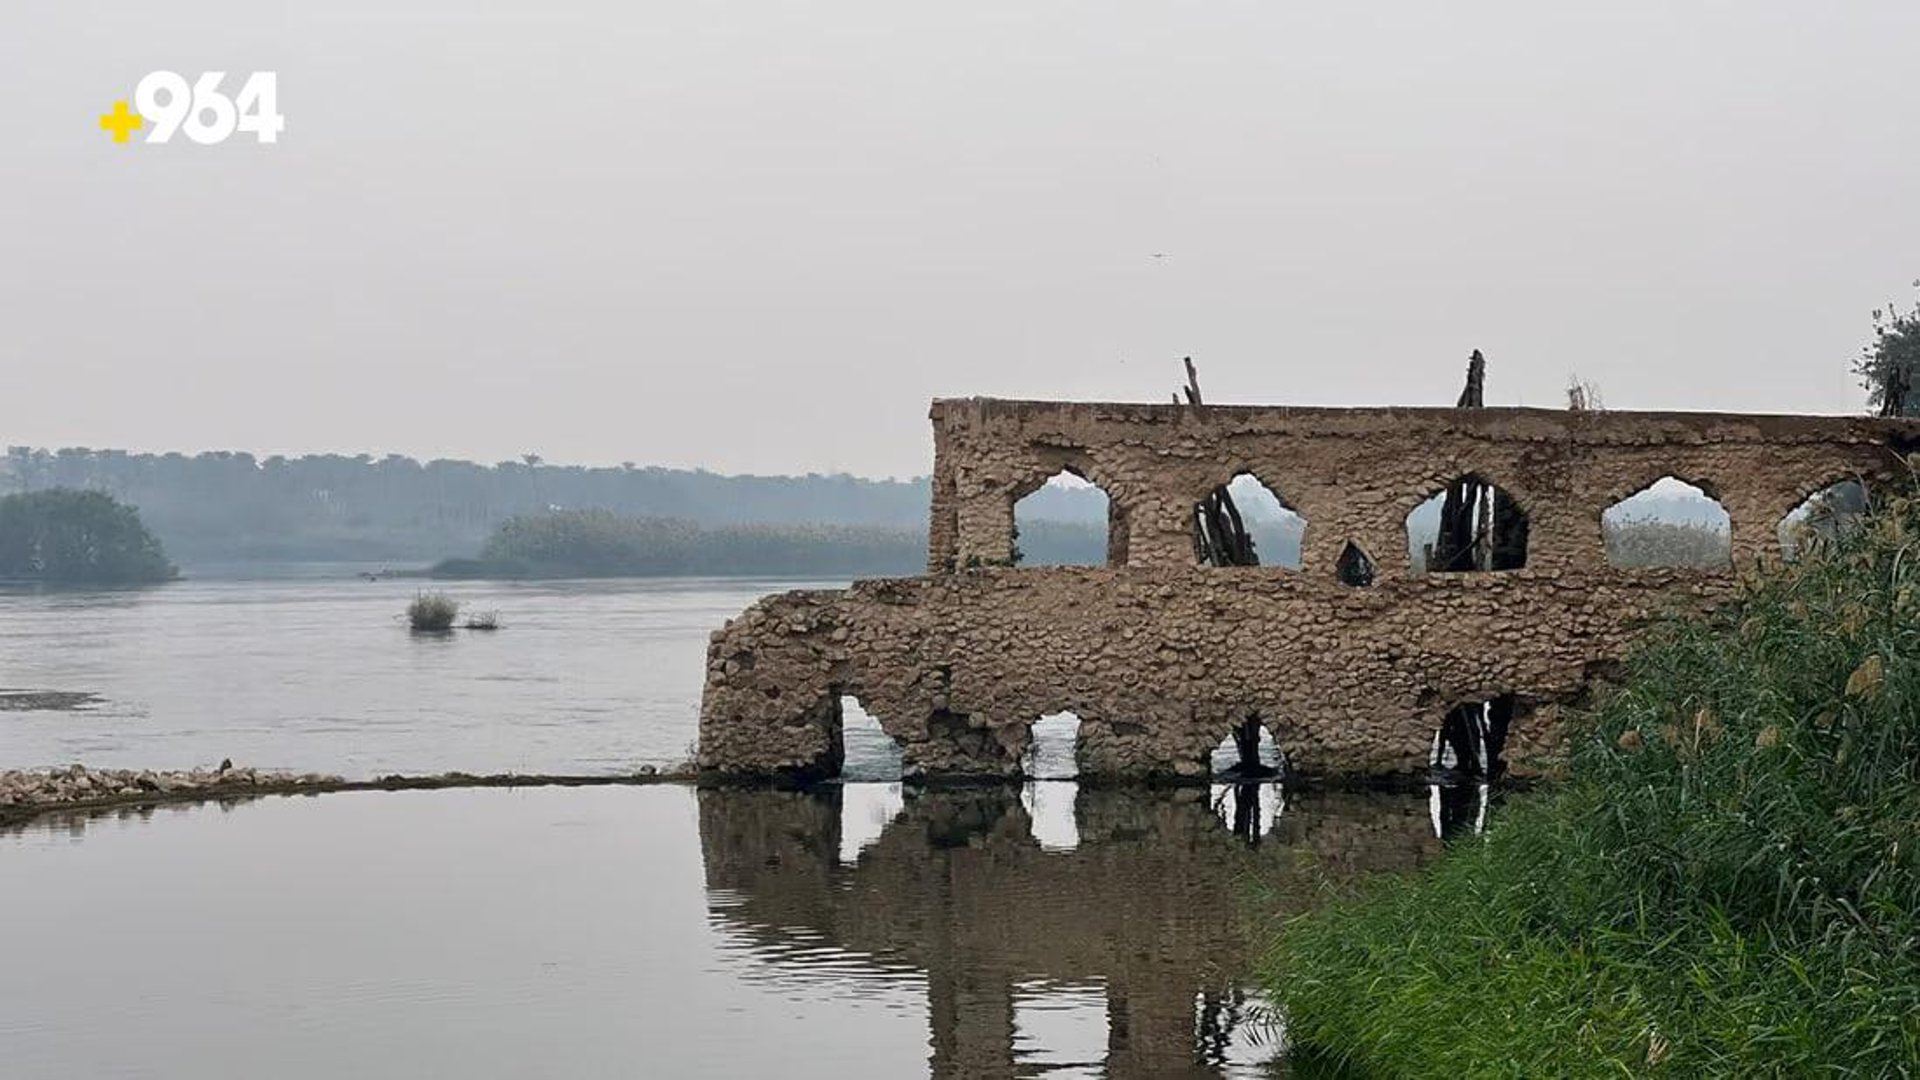 PHOTOS Scenic views of Hadithas streets and the Euphrates River on an overcast day